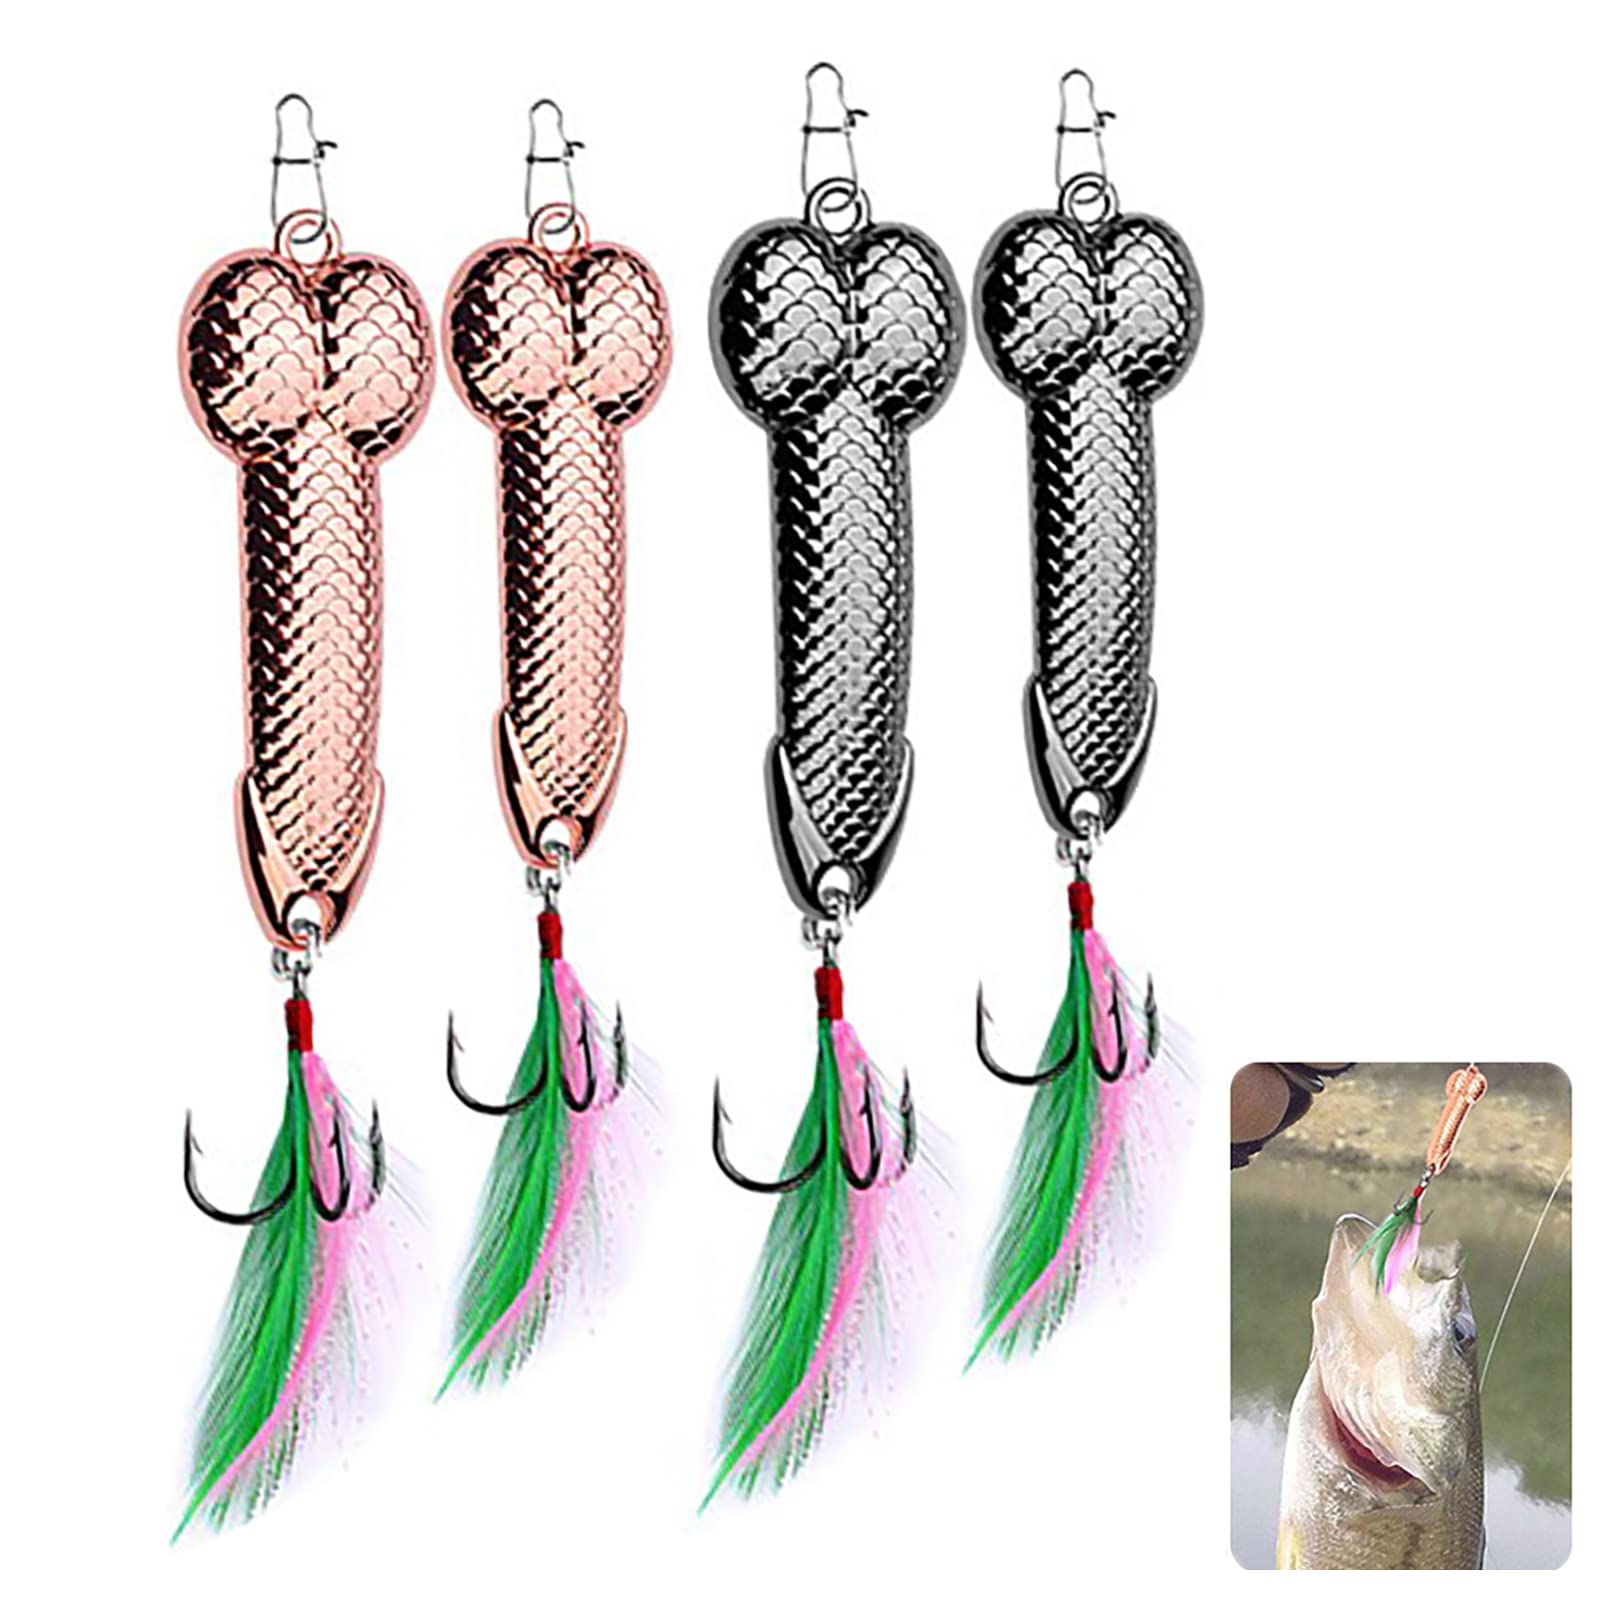 4PCS Fishing Lures Fishing Spoons,Special Shaped Hard Metal Sequin